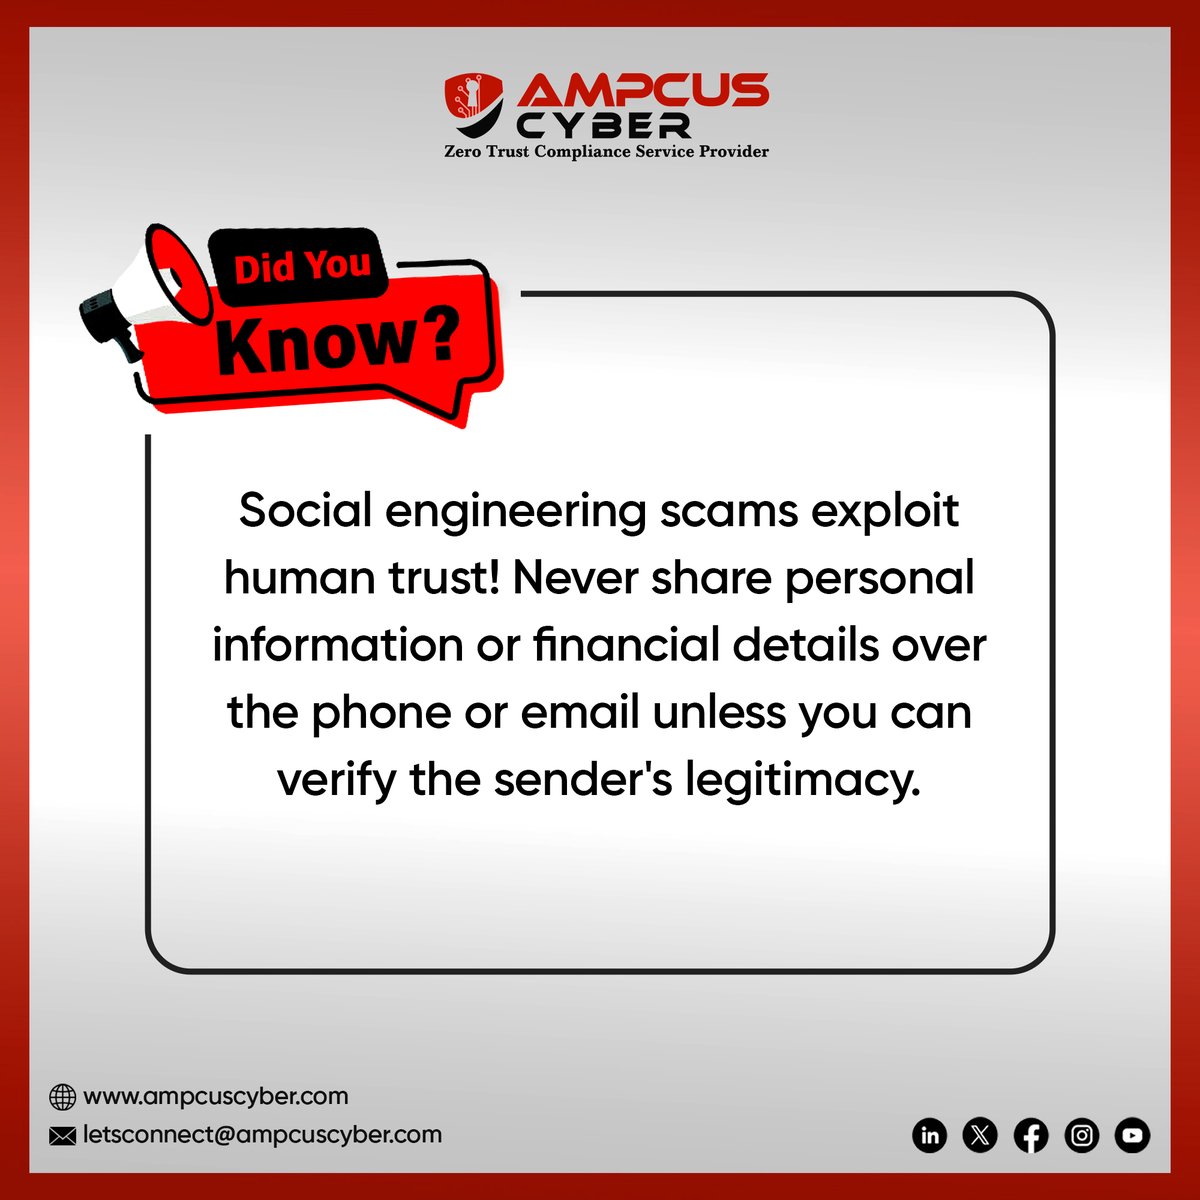 💡#Didyouknow that Social engineering scams exploit human trust! Never share personal information or financial details over the phone or email unless you can   verify the sender's legitimacy. 
 
#ampcuscyber #didyouknowfacts #socialengineering #vulnerabilities #cyberattack